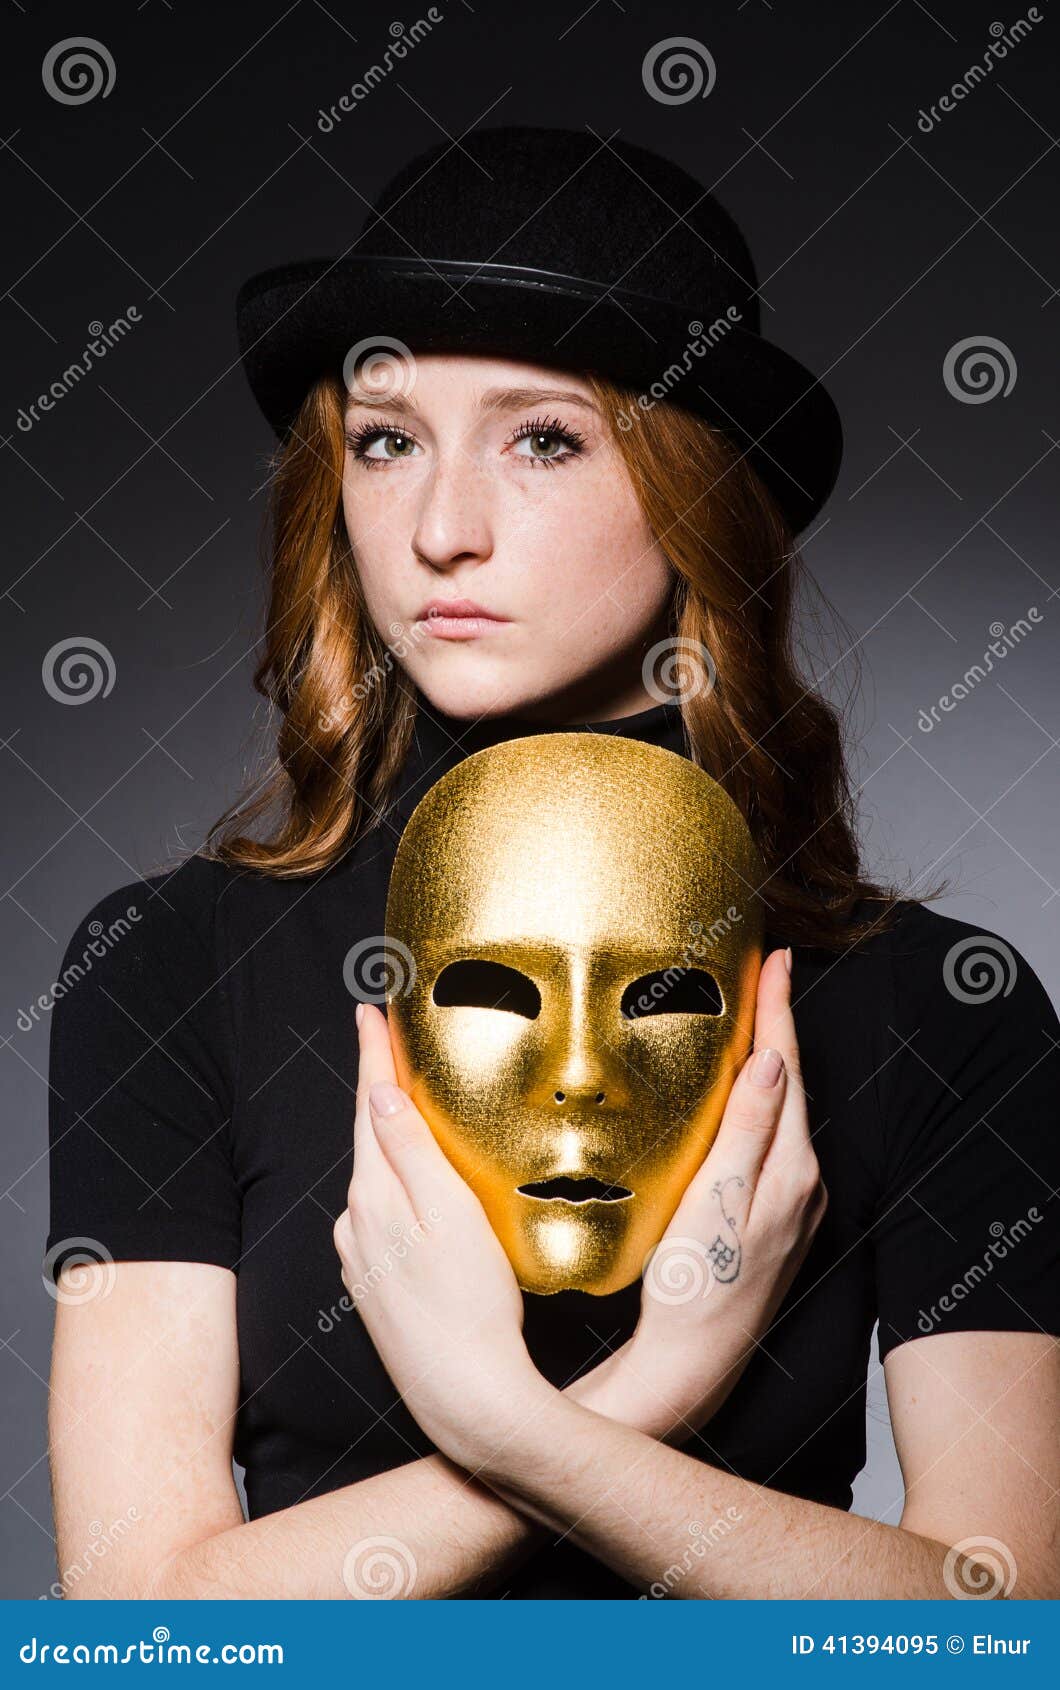 redhead woman in hat iwith mask in hypocrisy consept